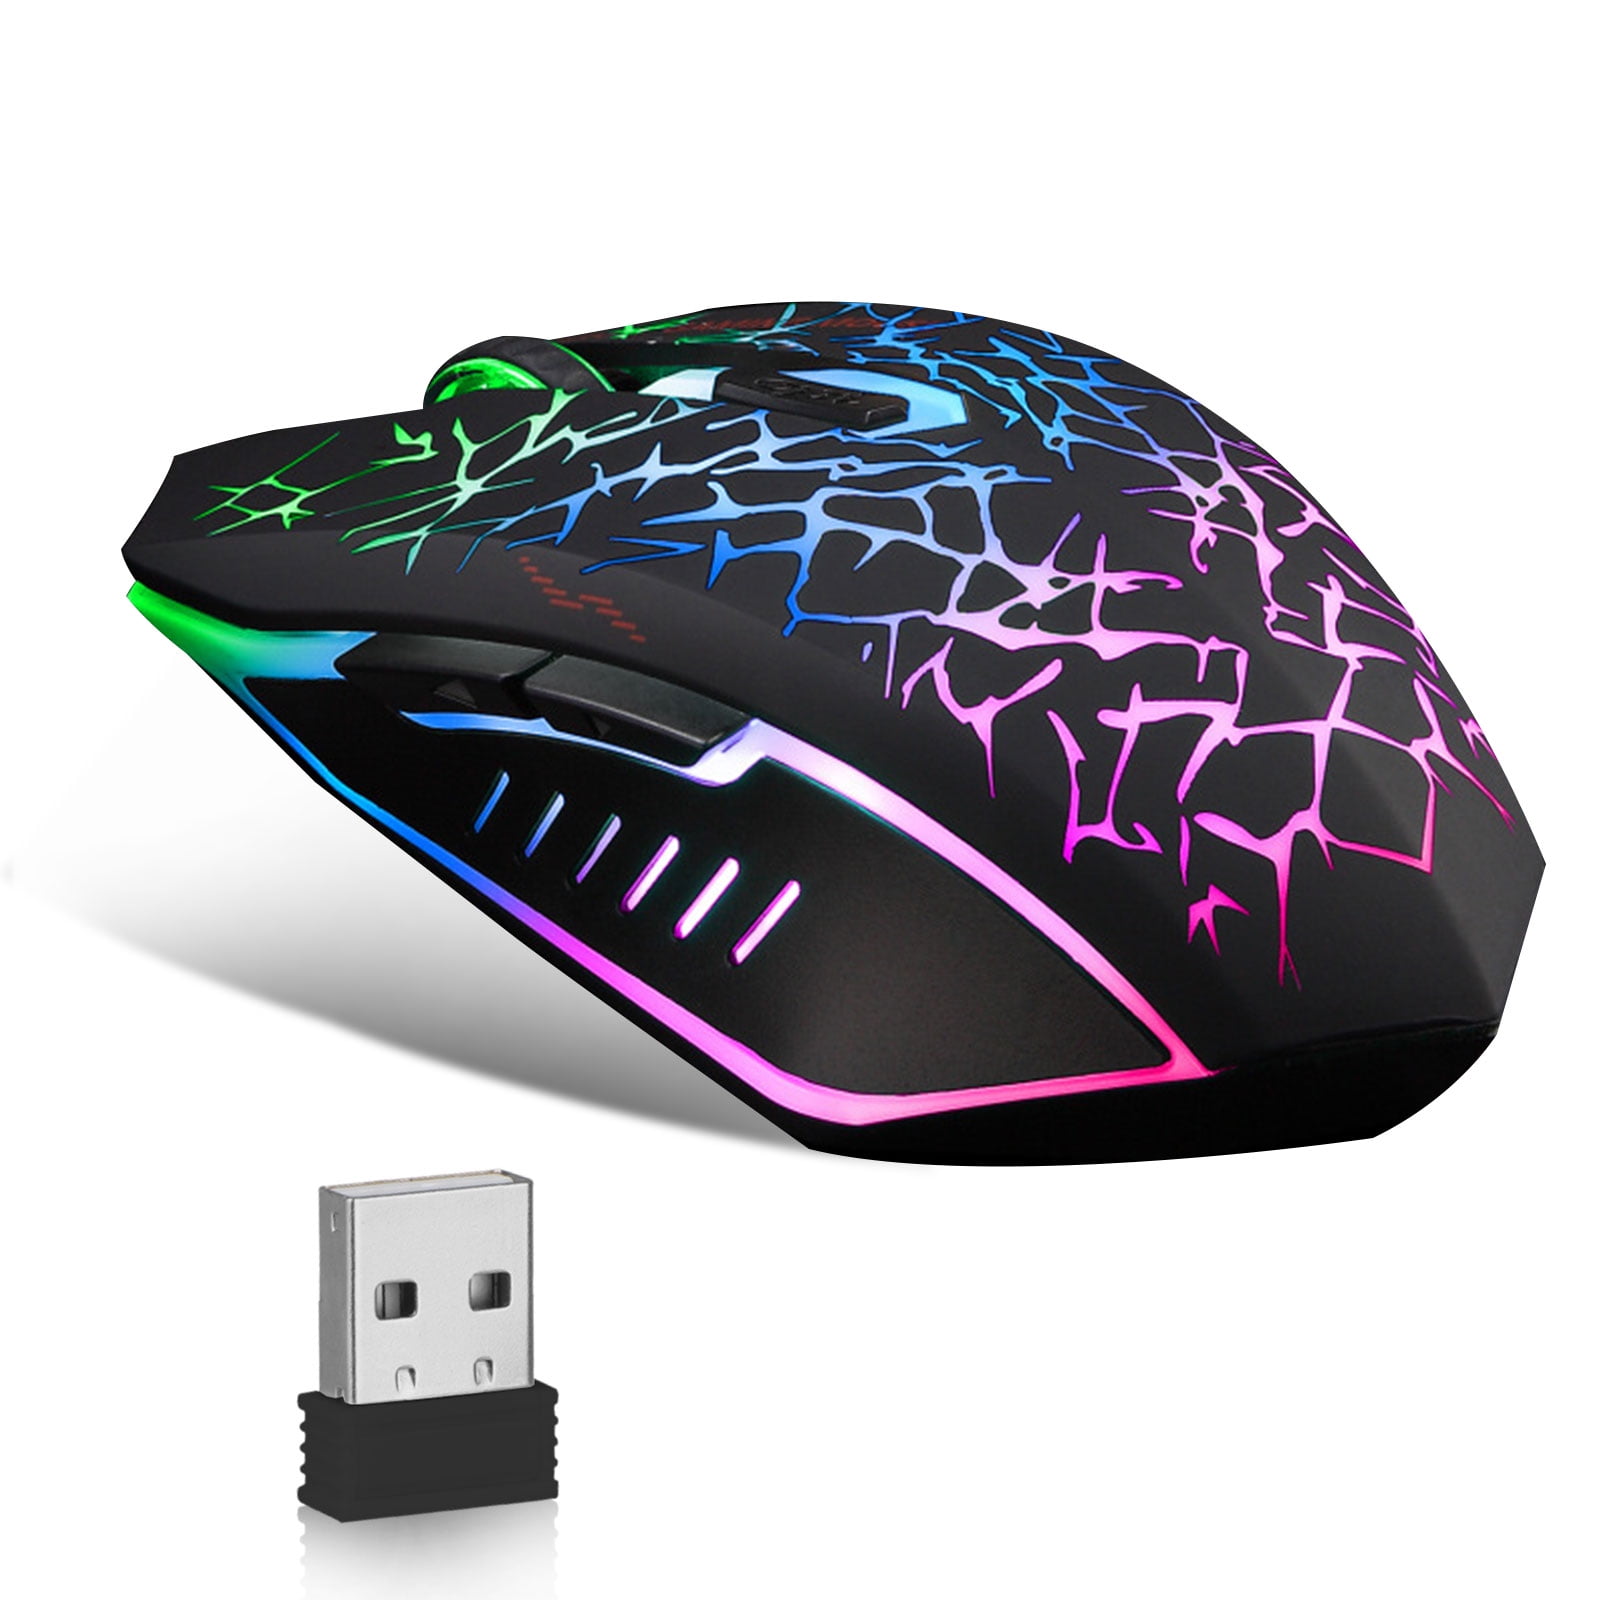 2.4GHz 6D 2400DPI LED Backlight Wireless Optical Gaming Mouse Mice For Laptop/PC 